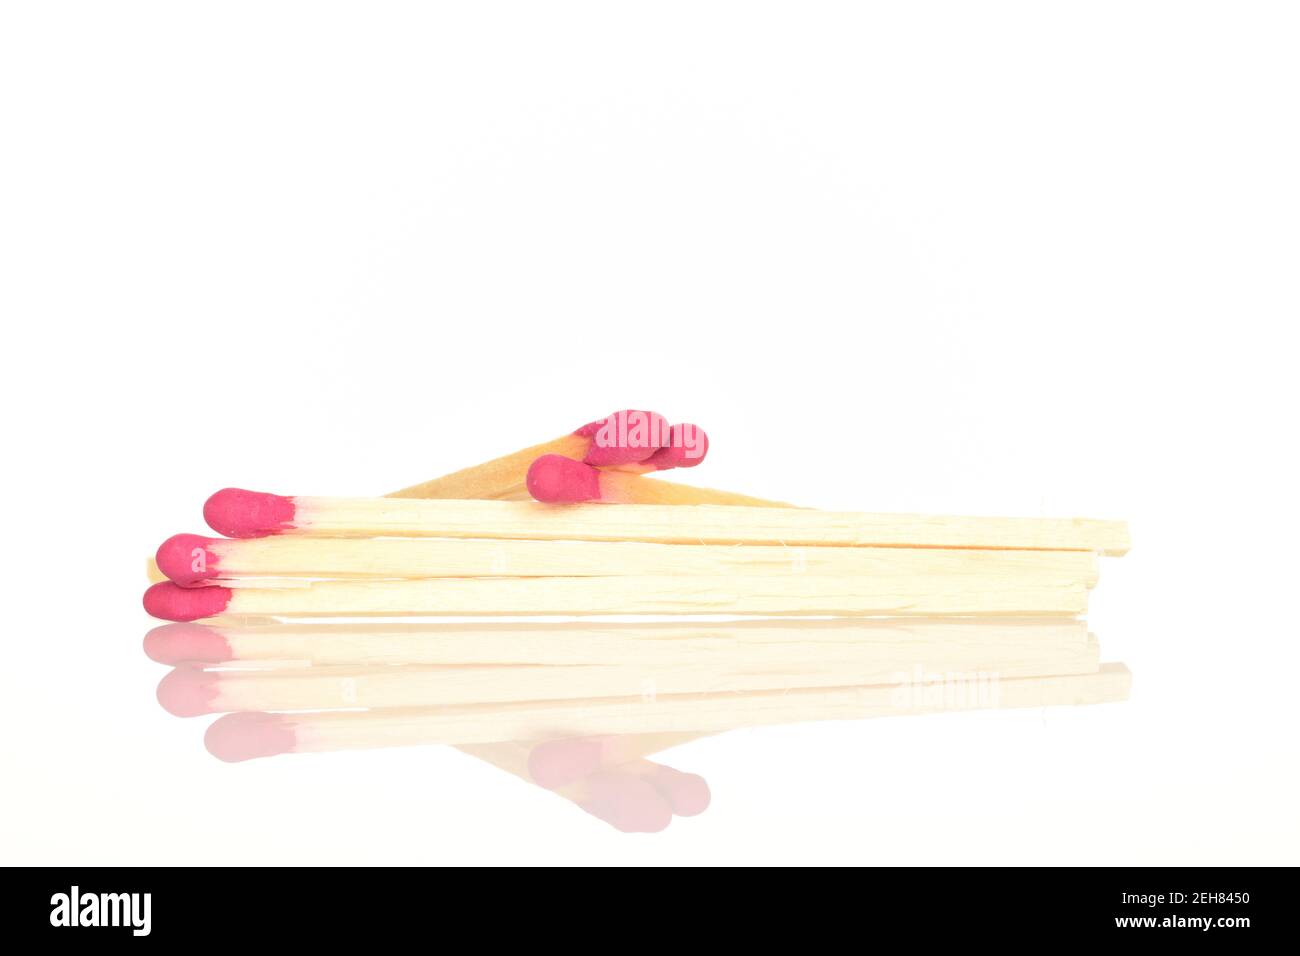 Several wooden matches, close-up, on a white background. Stock Photo